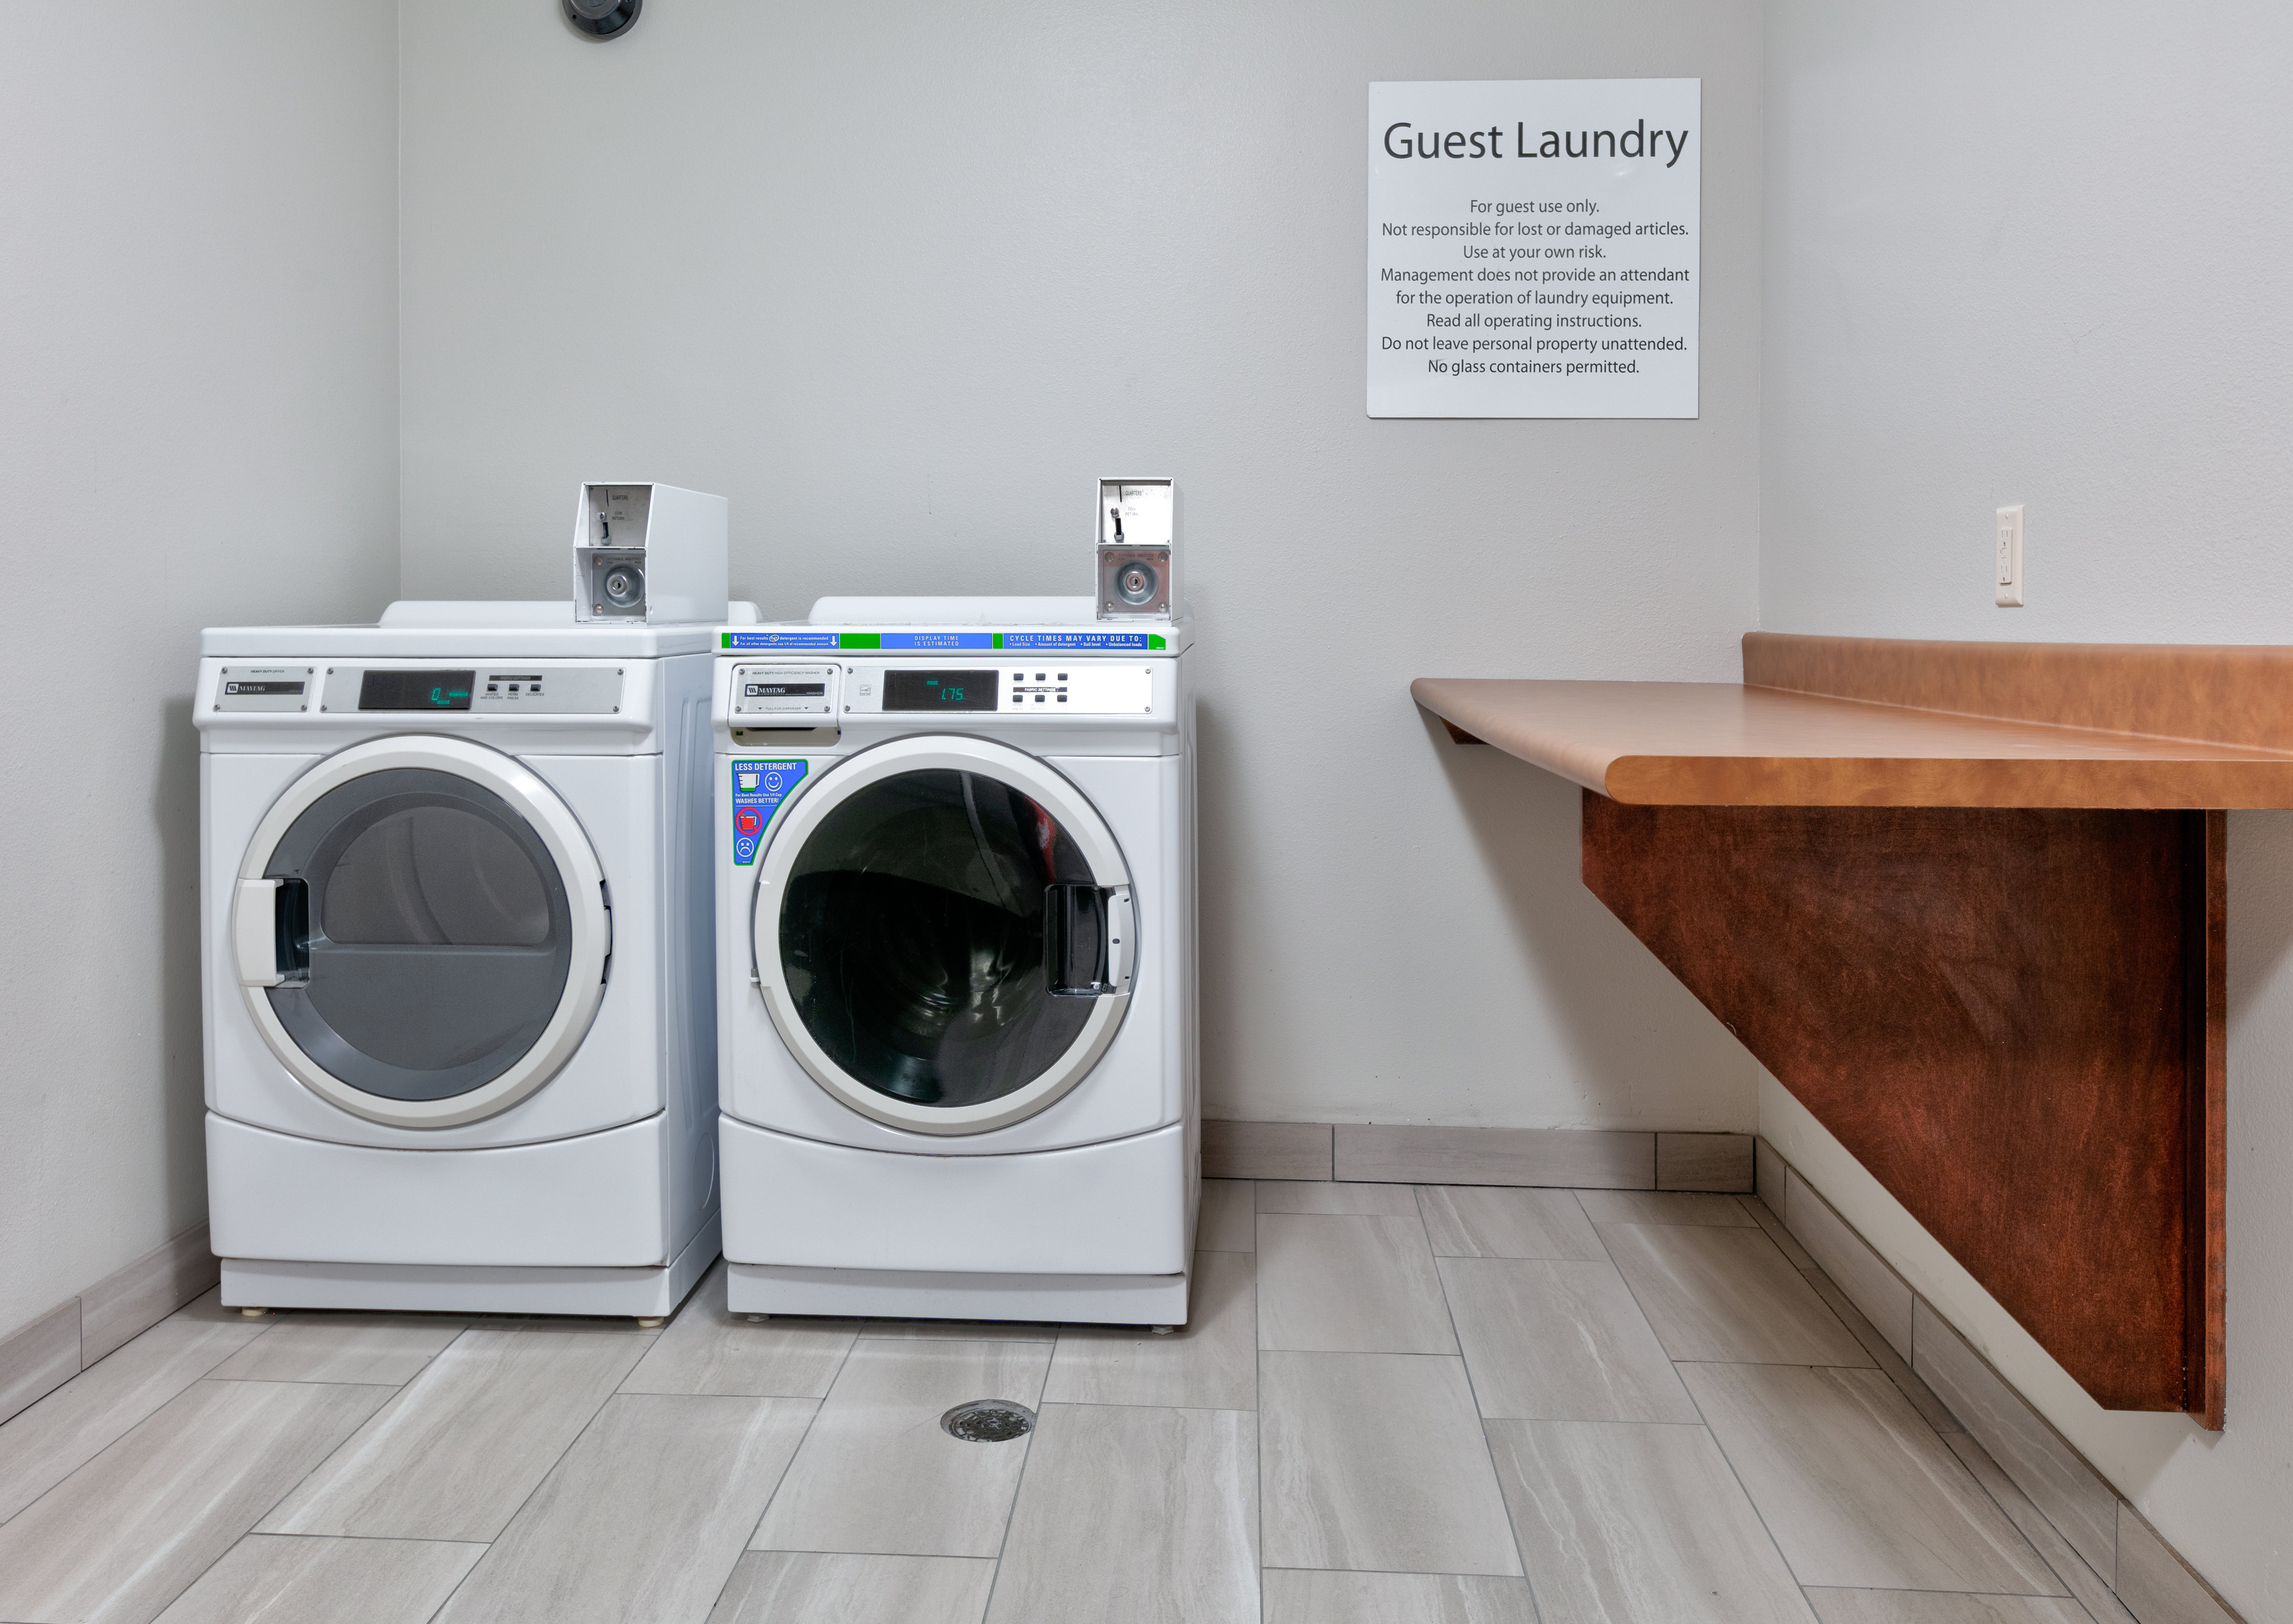 A washer and dryer is located on each floor for your convenience